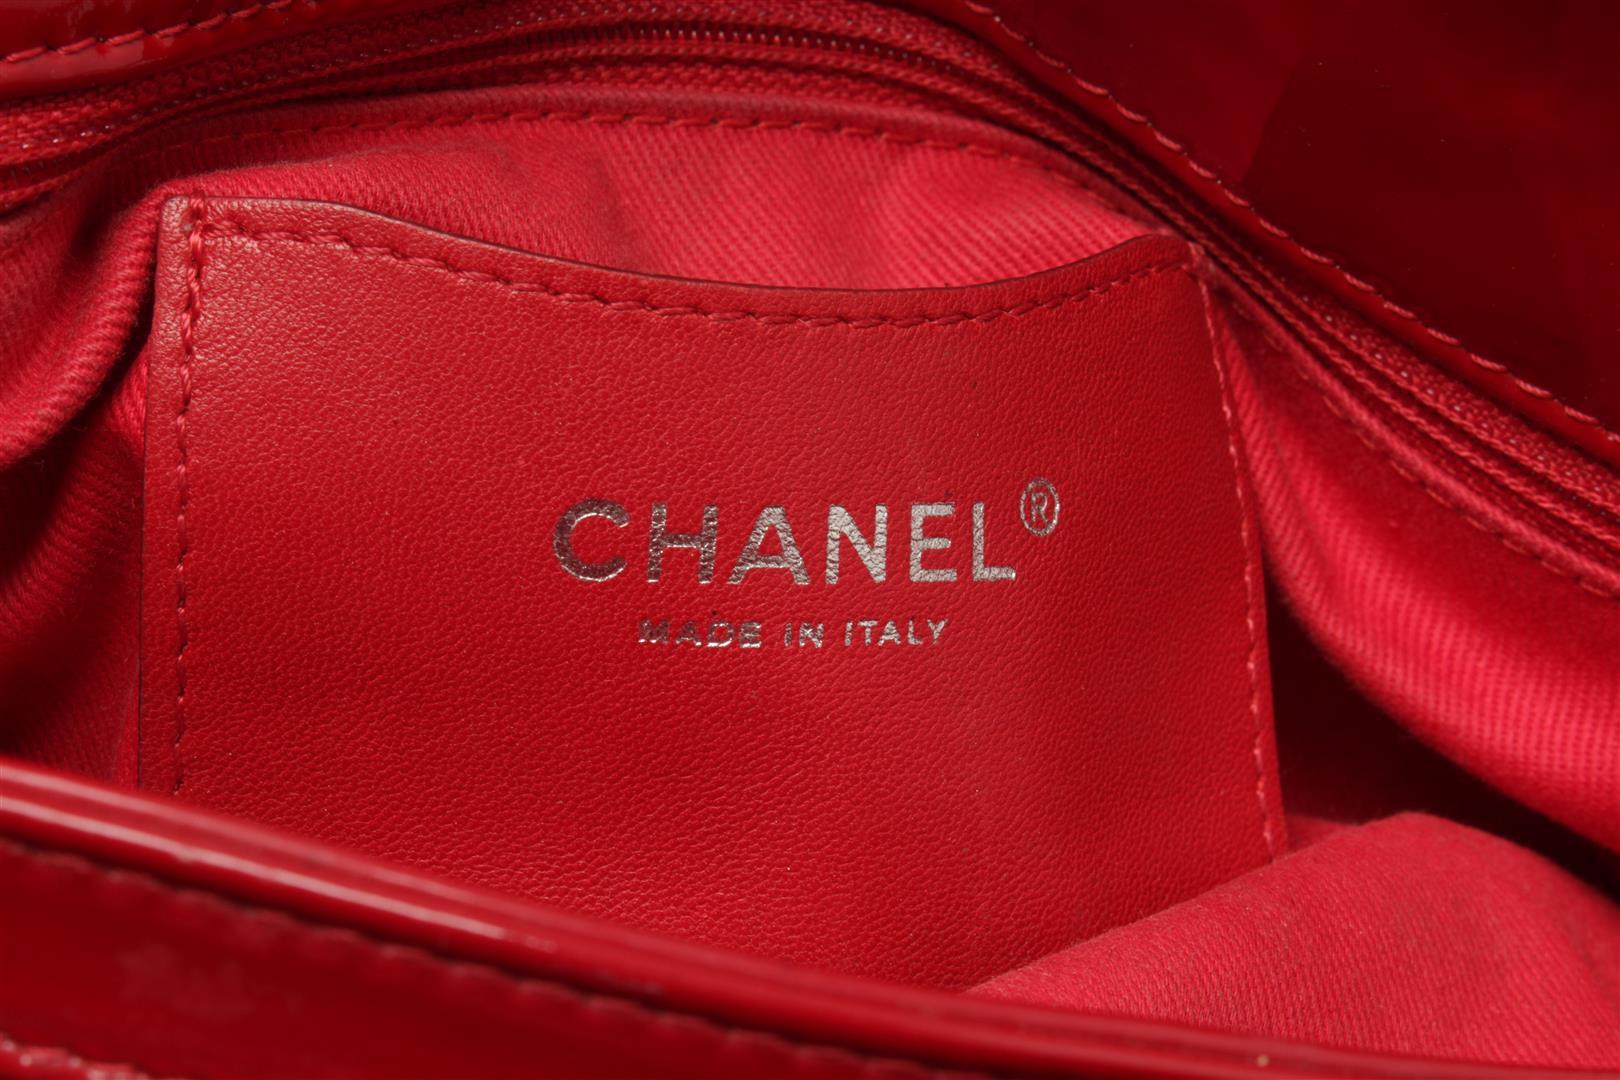 Chanel Red Quilted Patent Bowling Chain Shoulder Bag